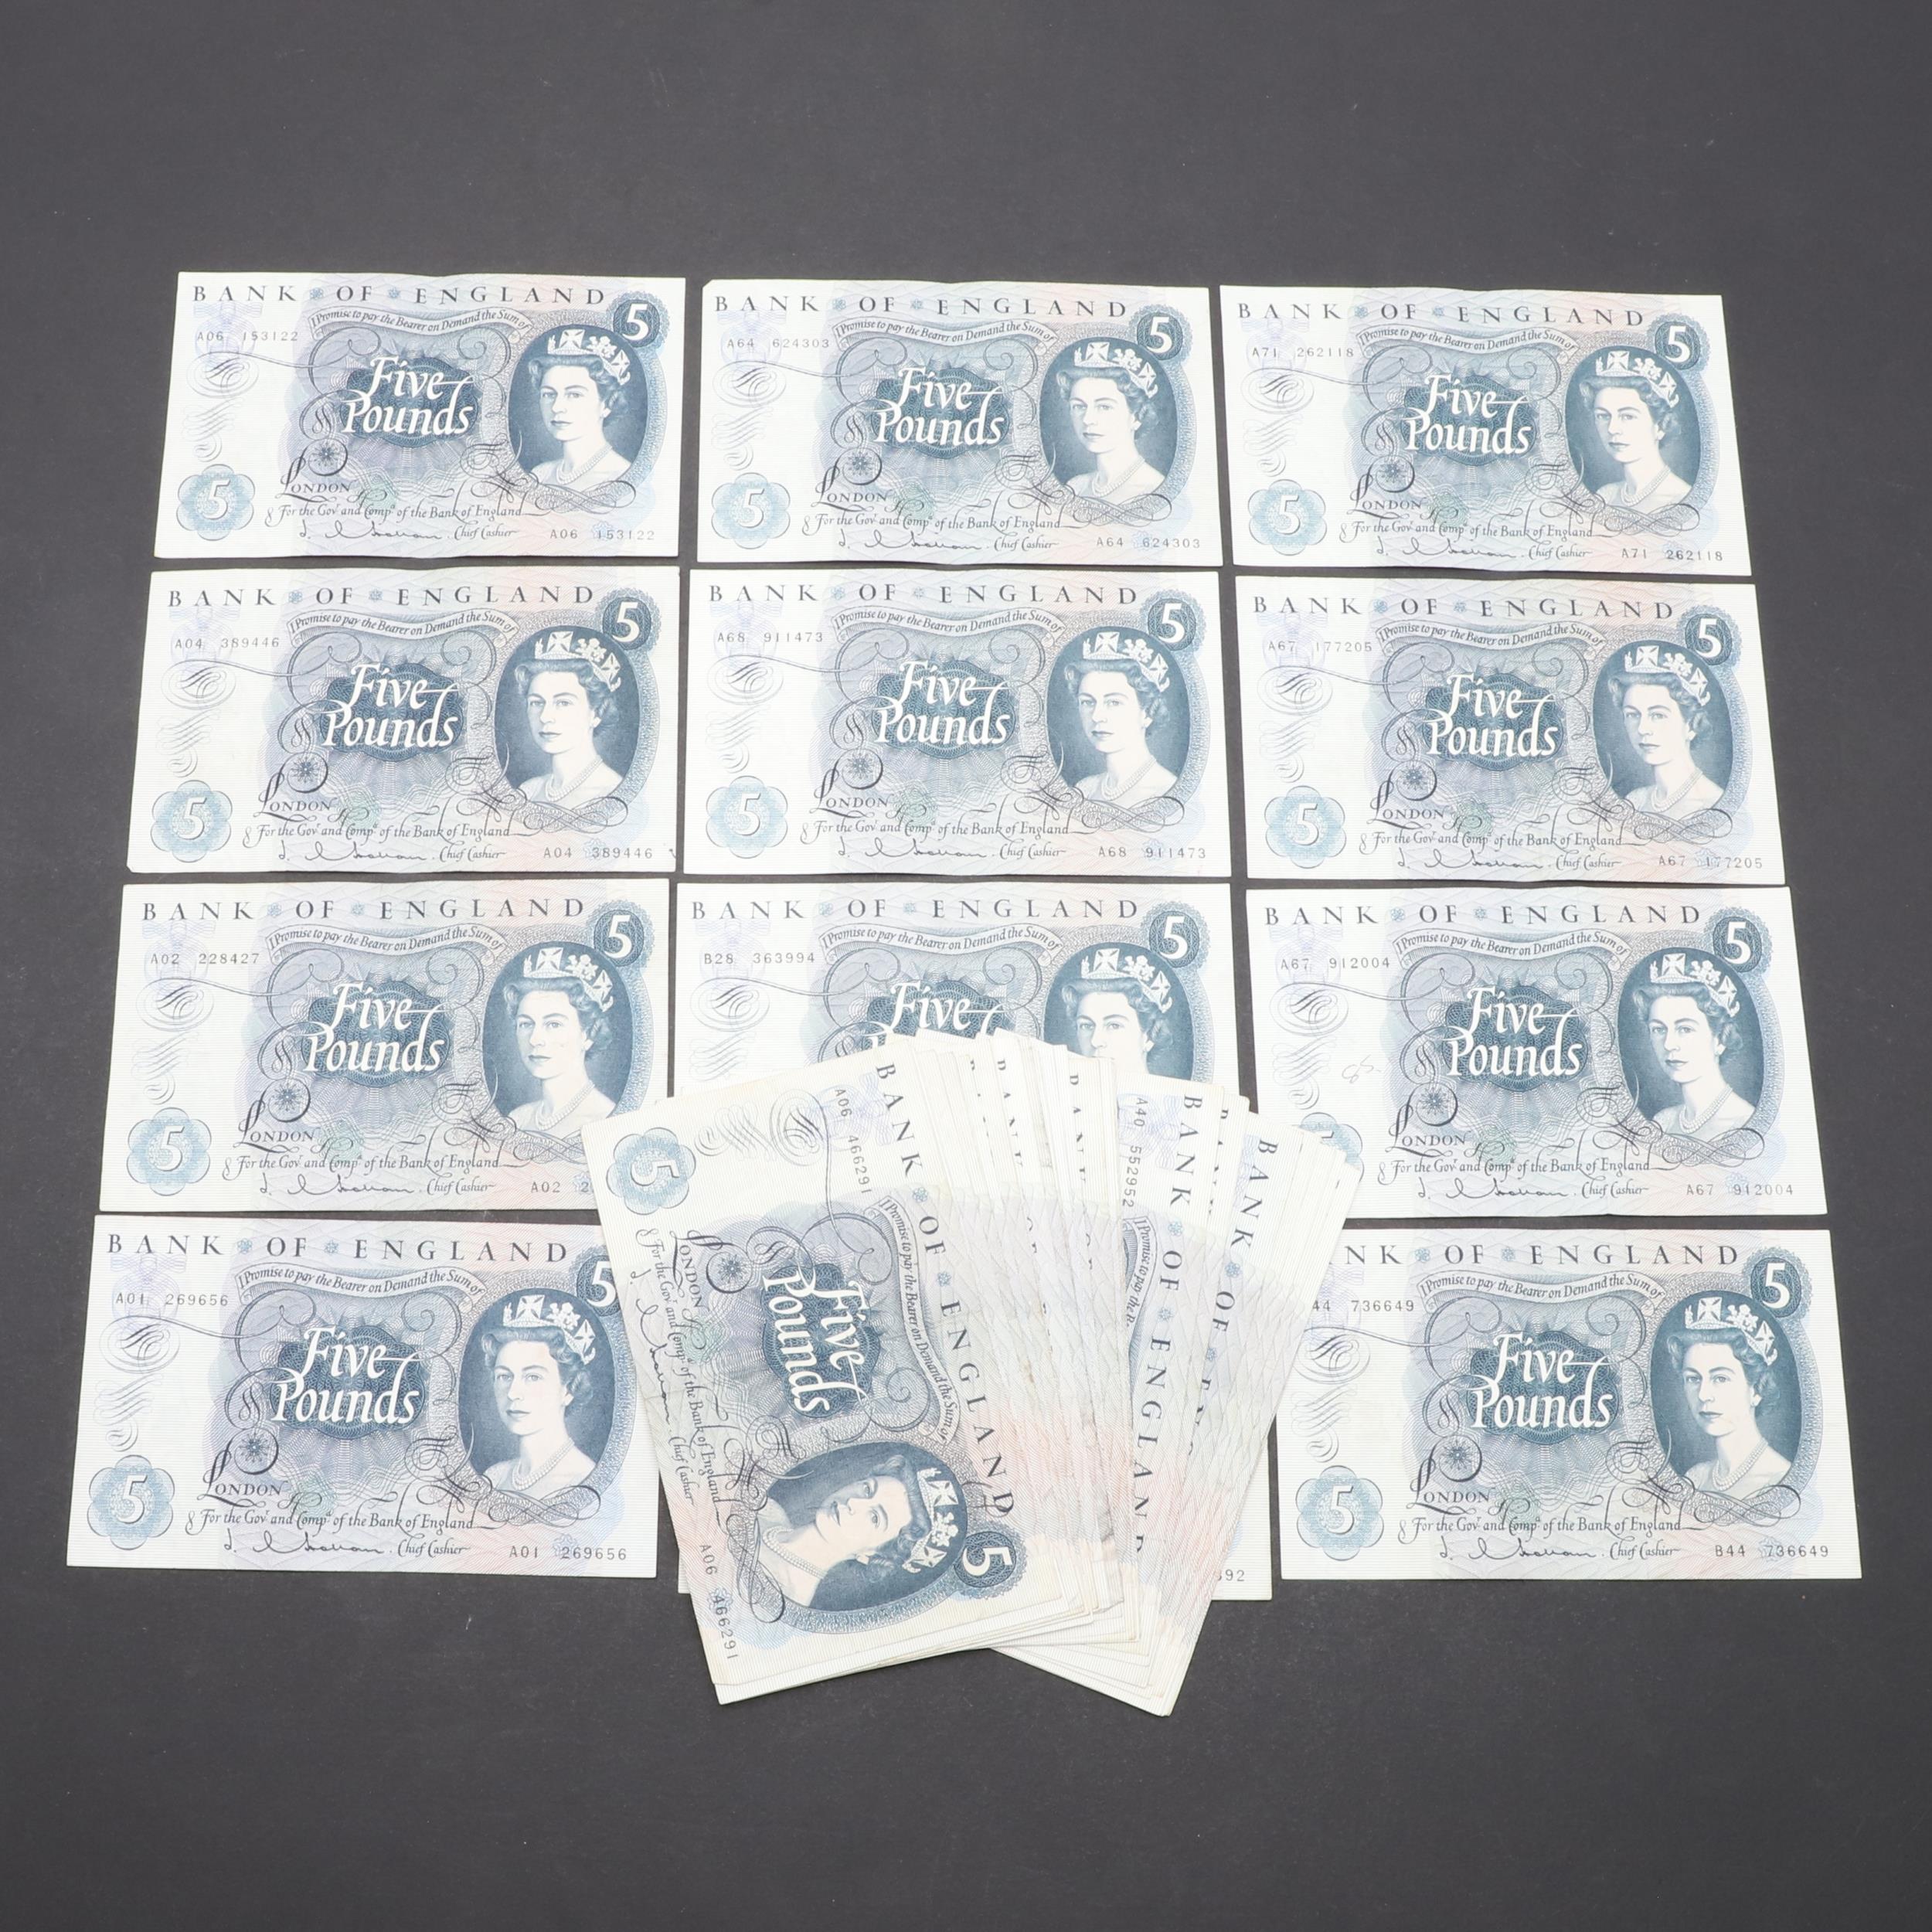 A COLLECTION OF 42 BANK OF ENGLAND SERIES 'C' FIVE POUND NOTES.